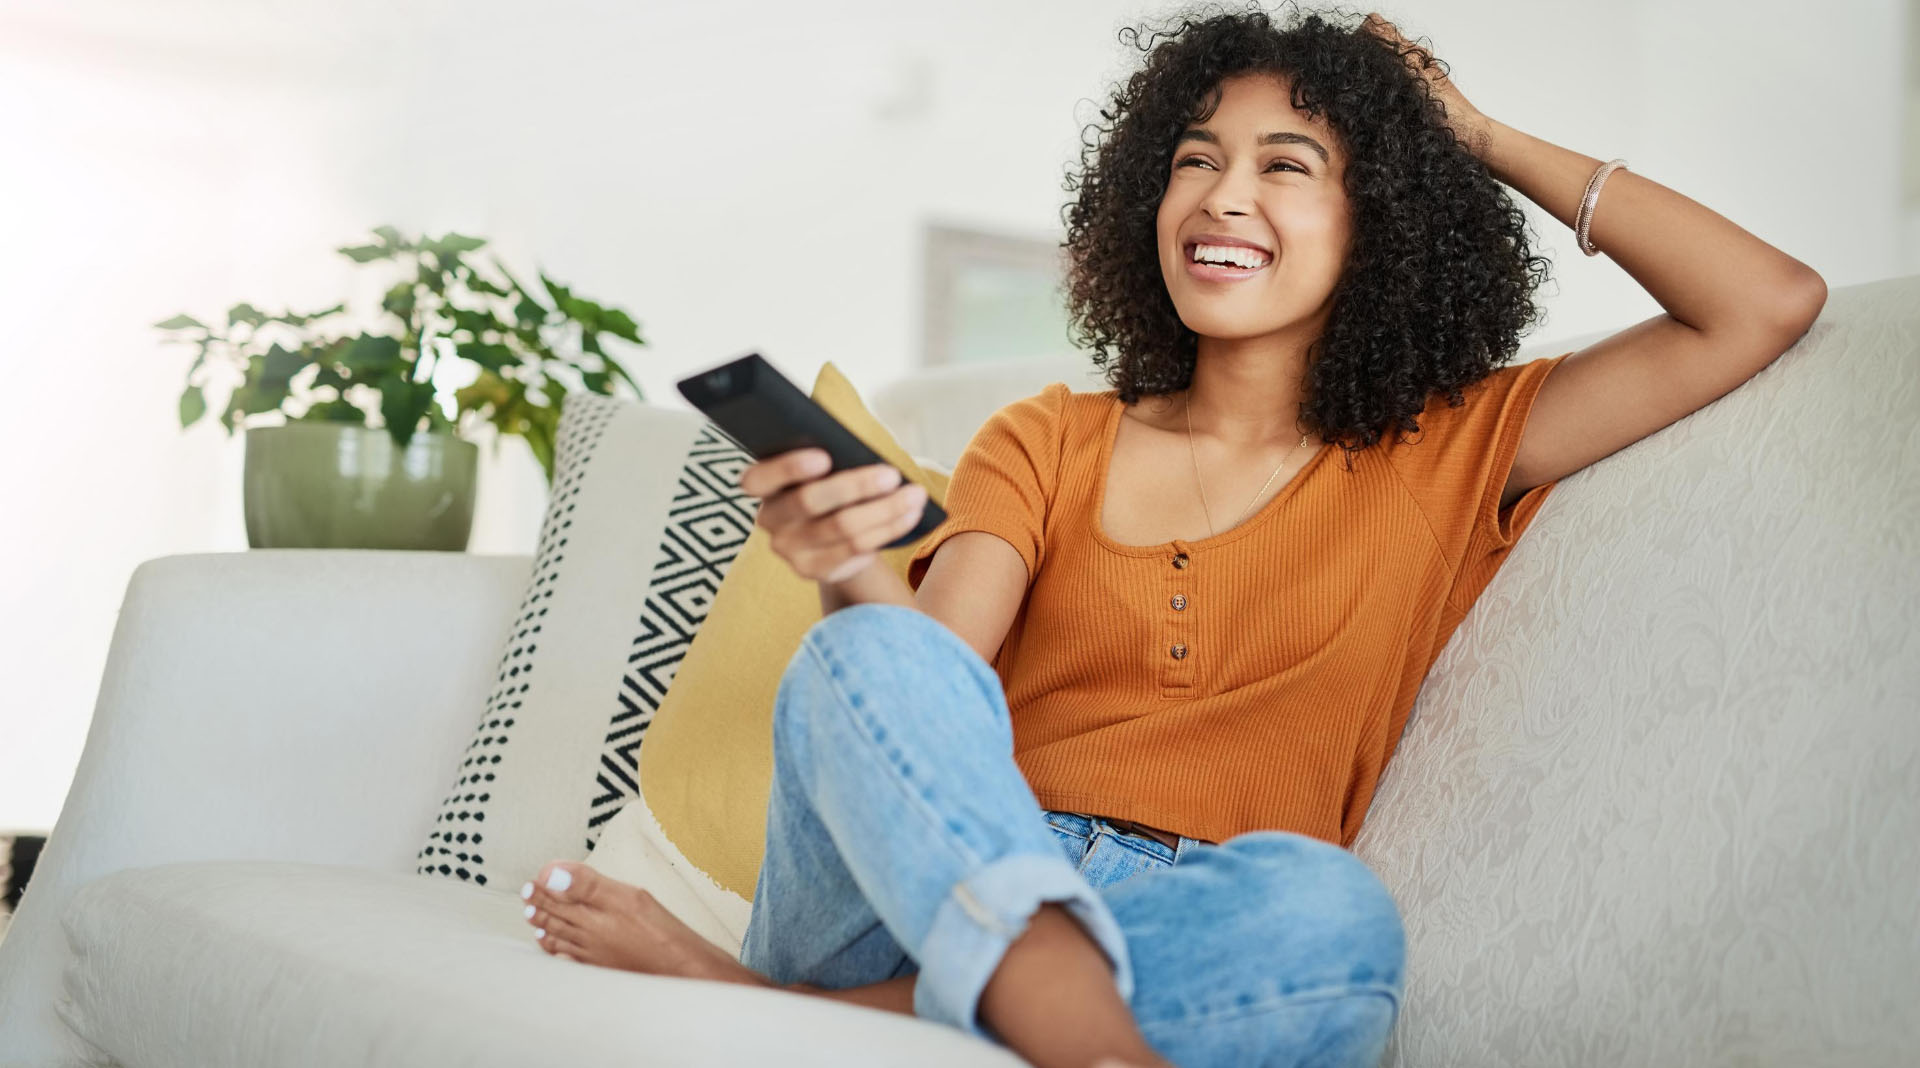 A smiling young woman holding a TV remote control while sitting on a couch